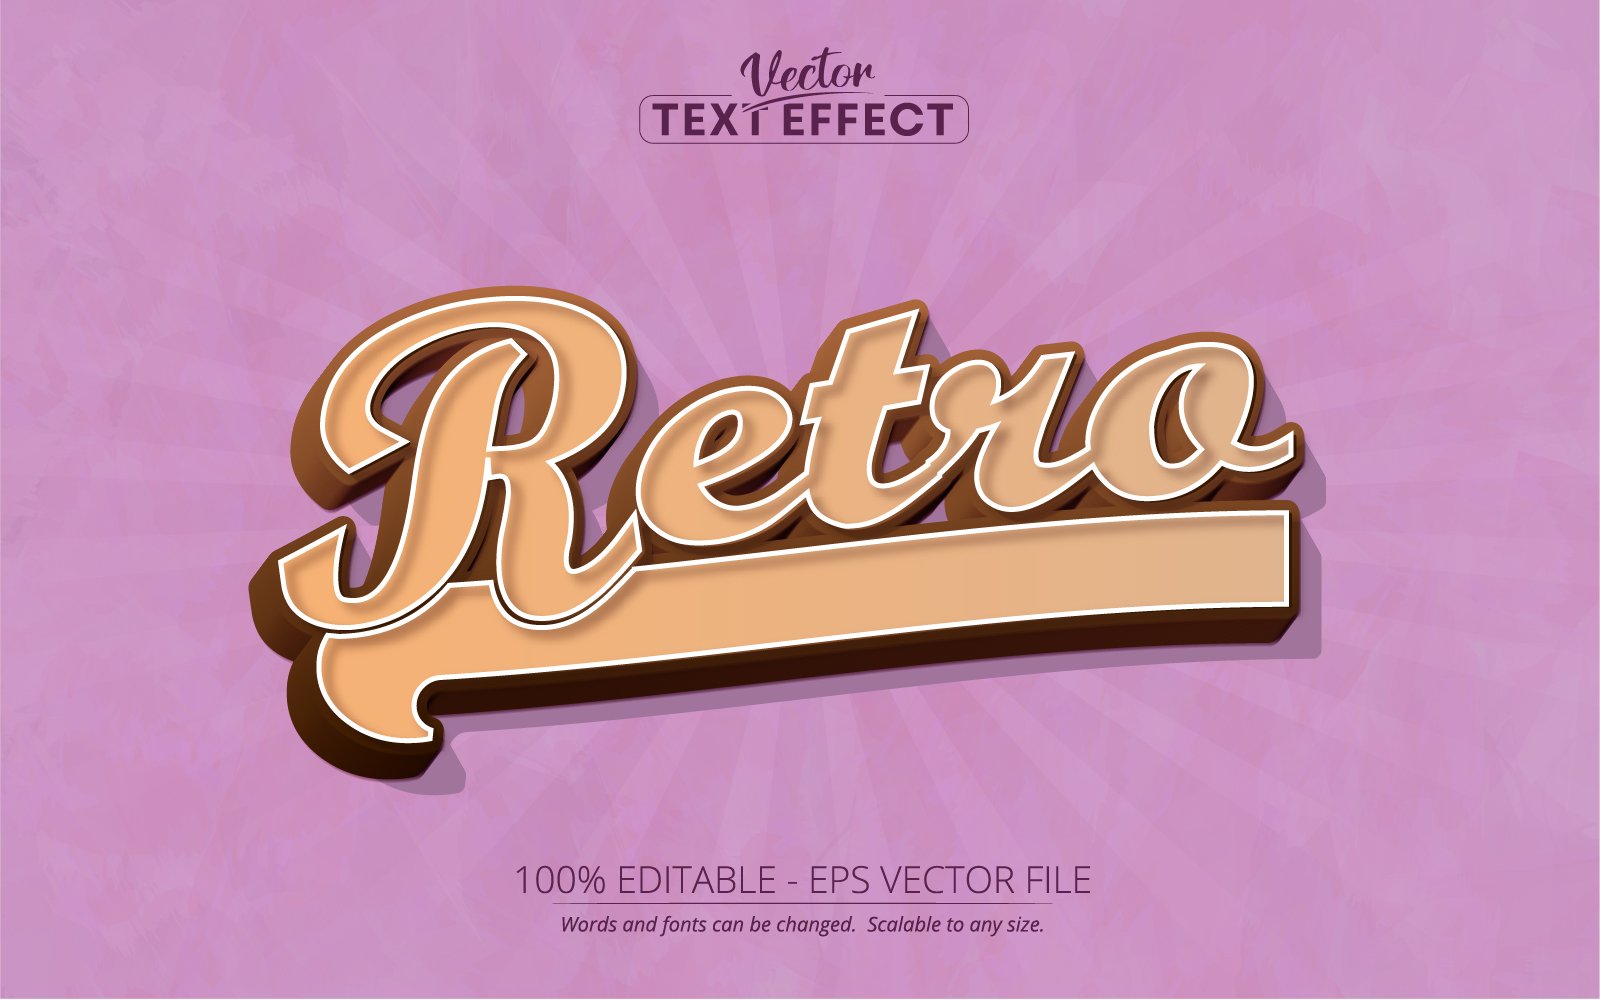 Retro - Editable Text Effect, Vintage And Retro 70s 80s Text Style, Graphics Illustration